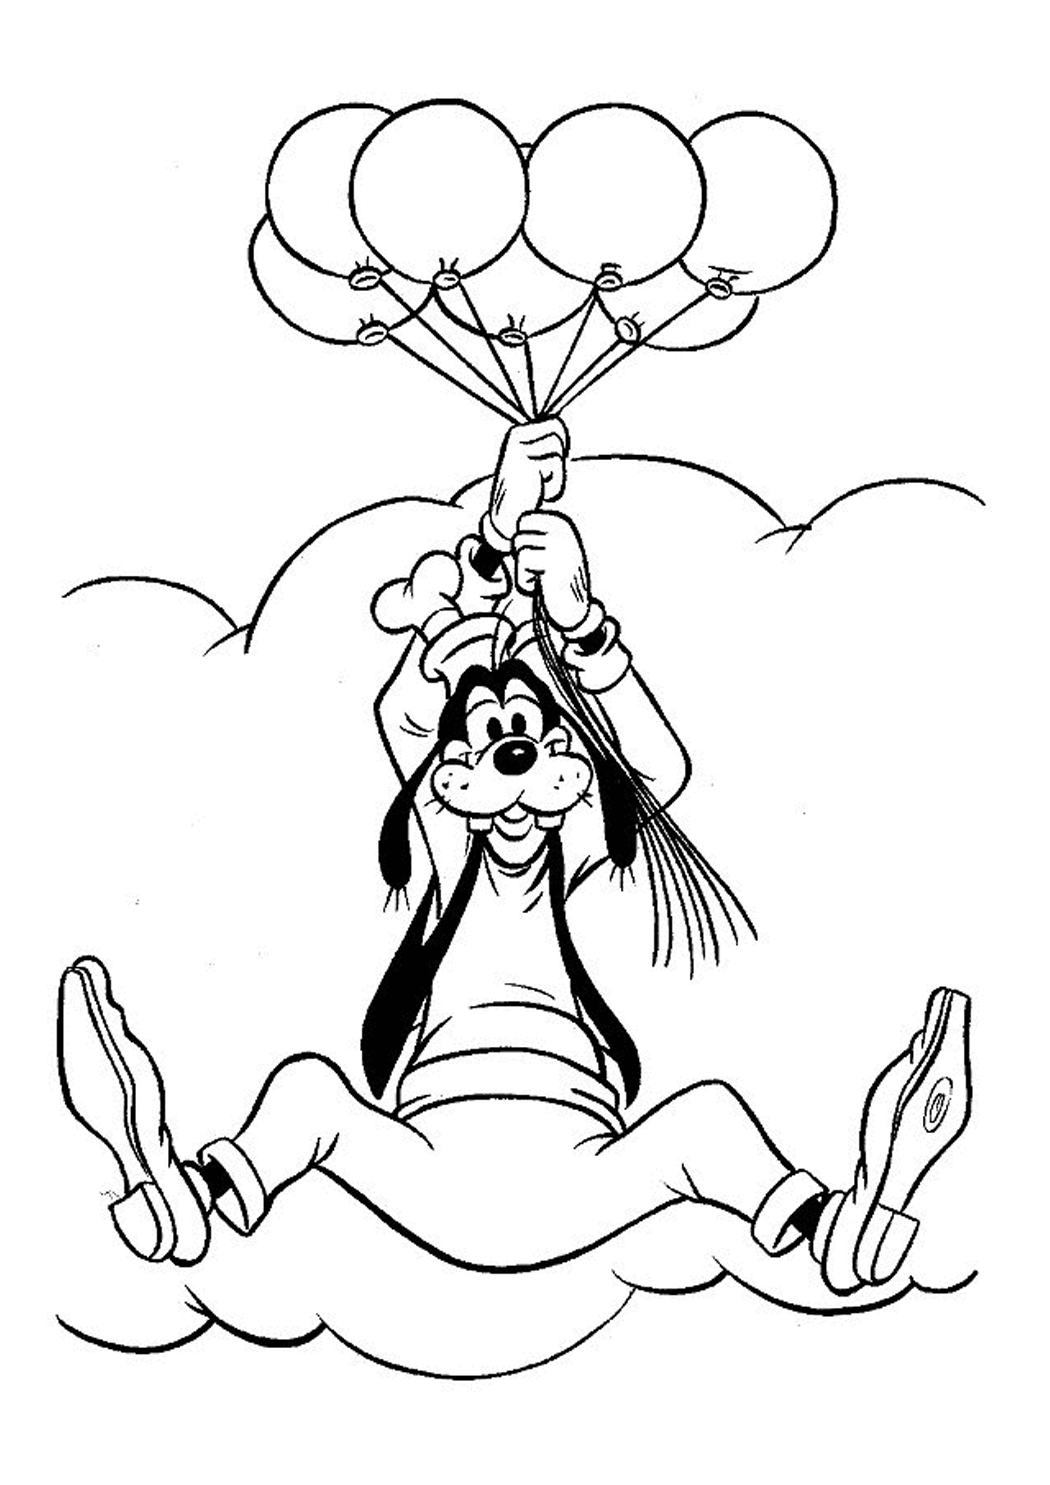 Goofy Coloring Pages For Kids - Goofy Fall Coloring Pages